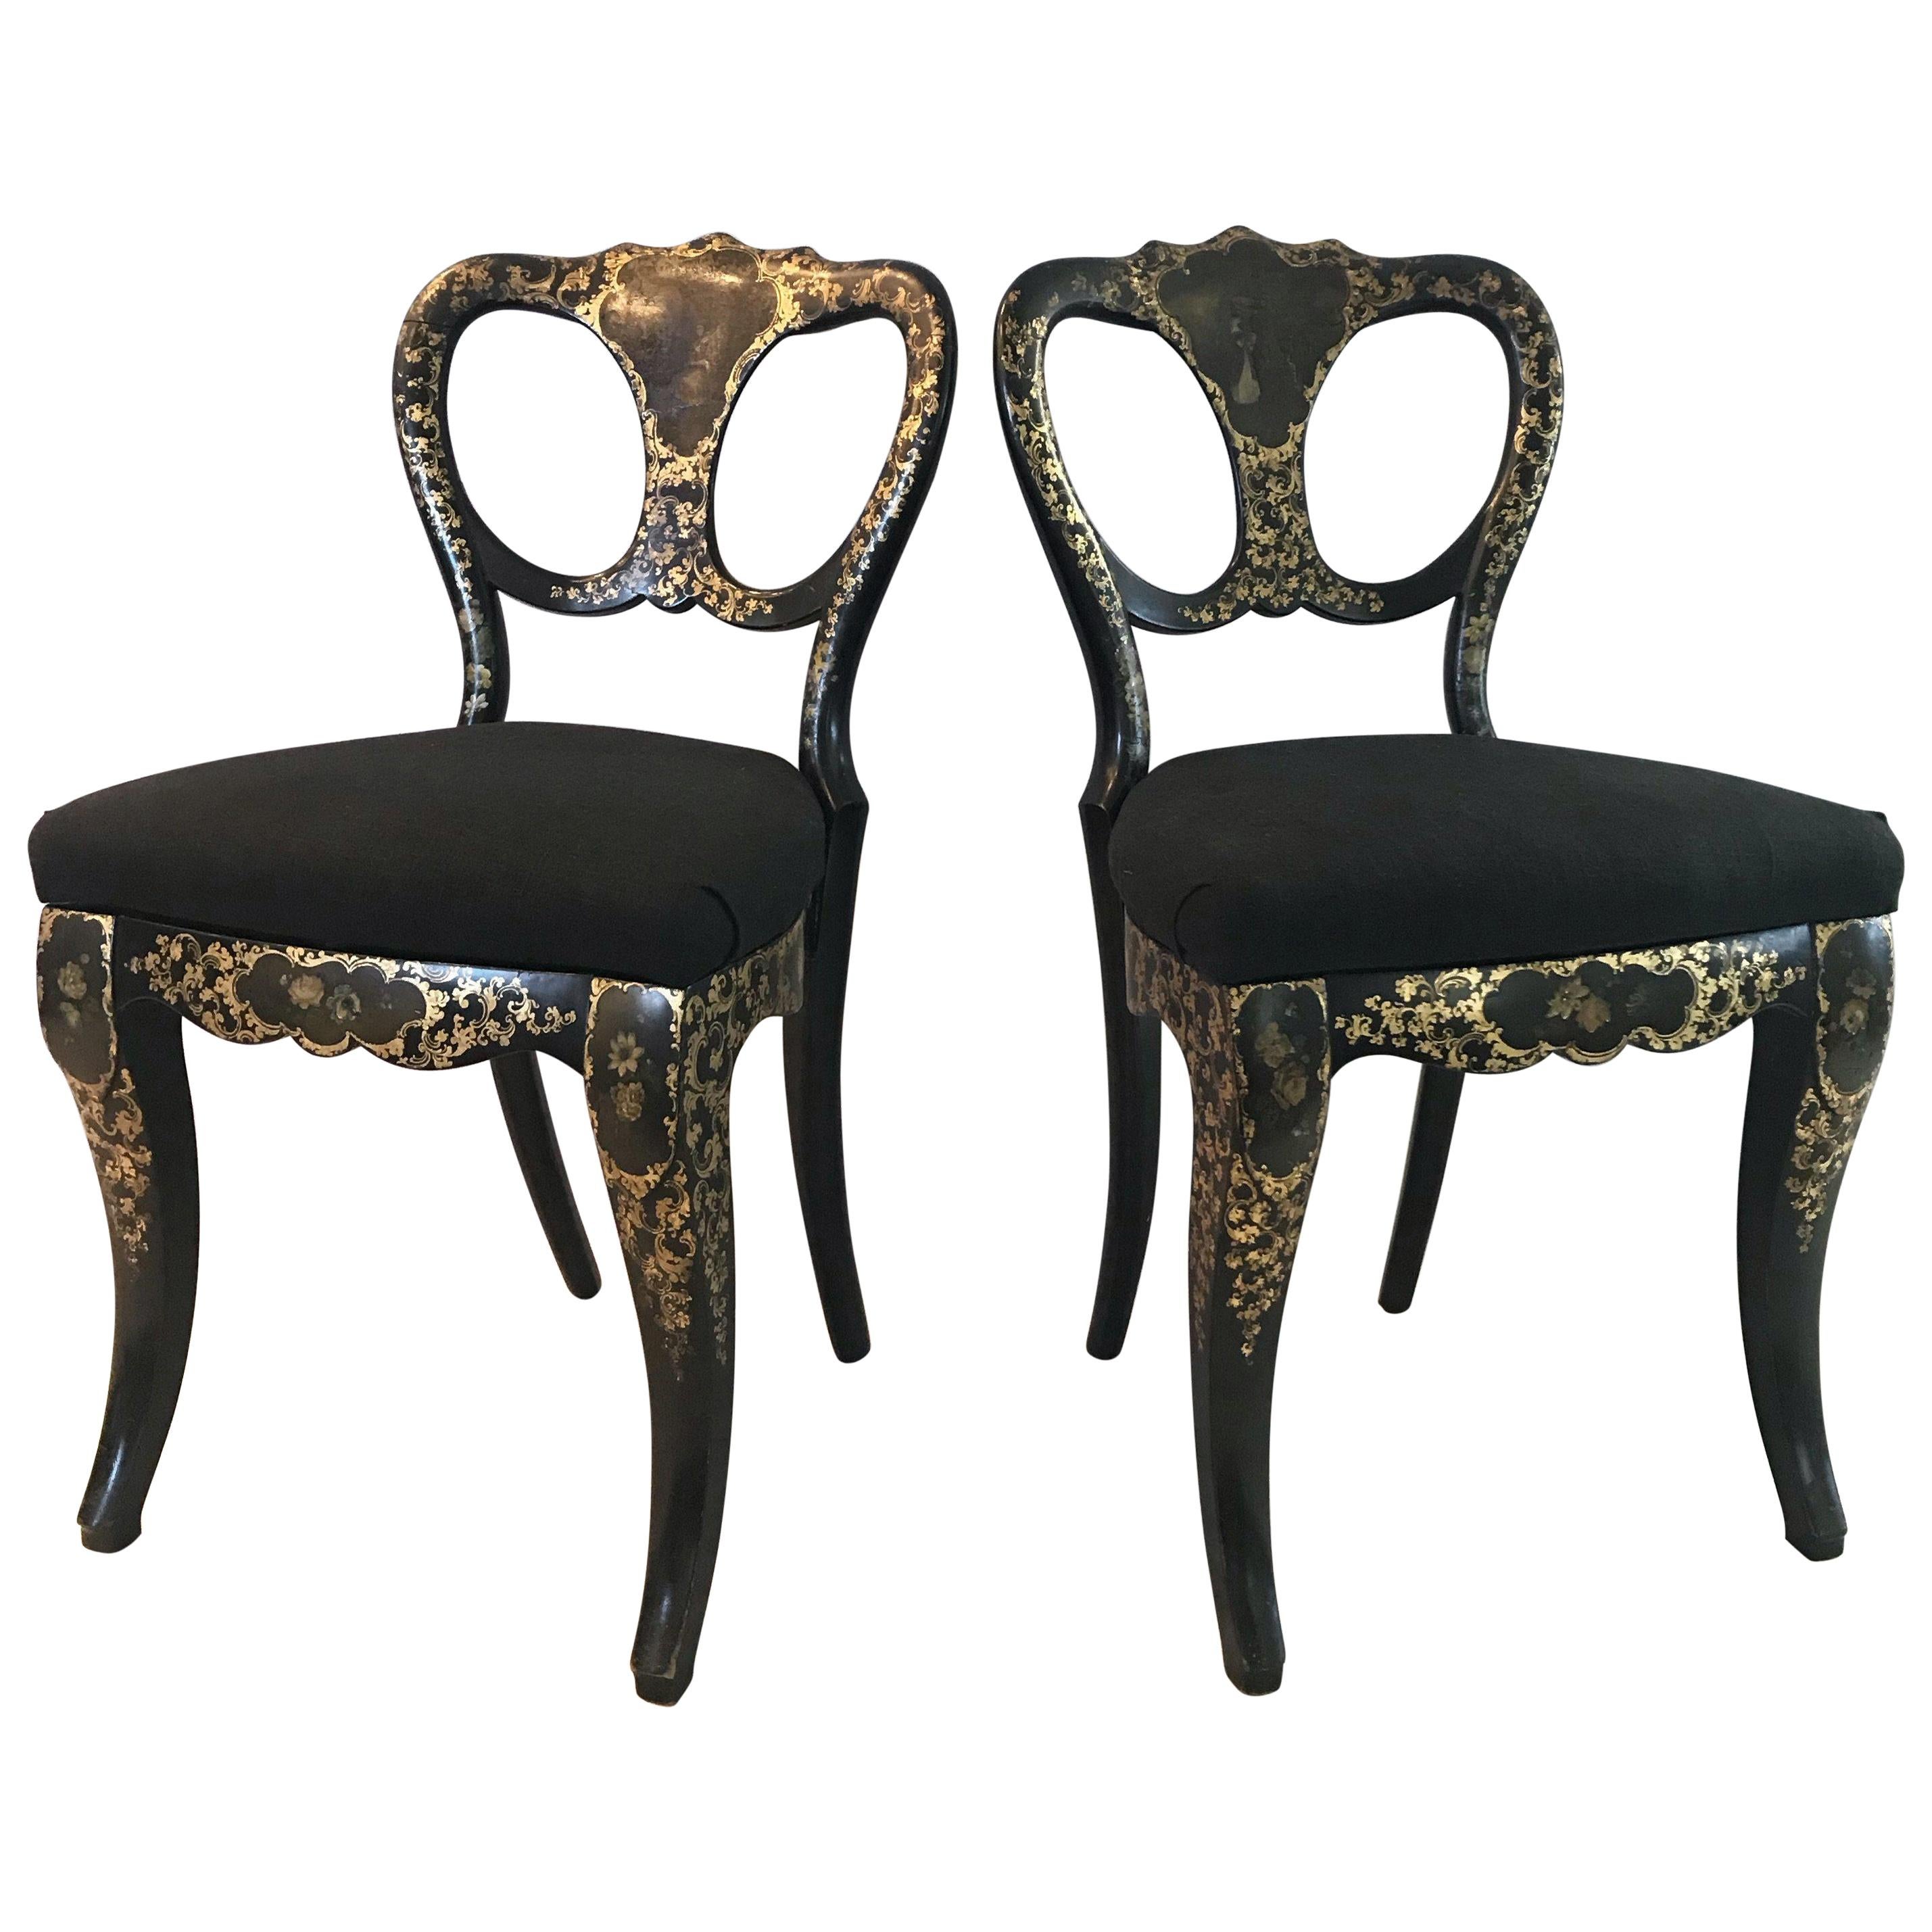 Exquisite Pair of French Hand Painted Ebony 19th Century Chairs